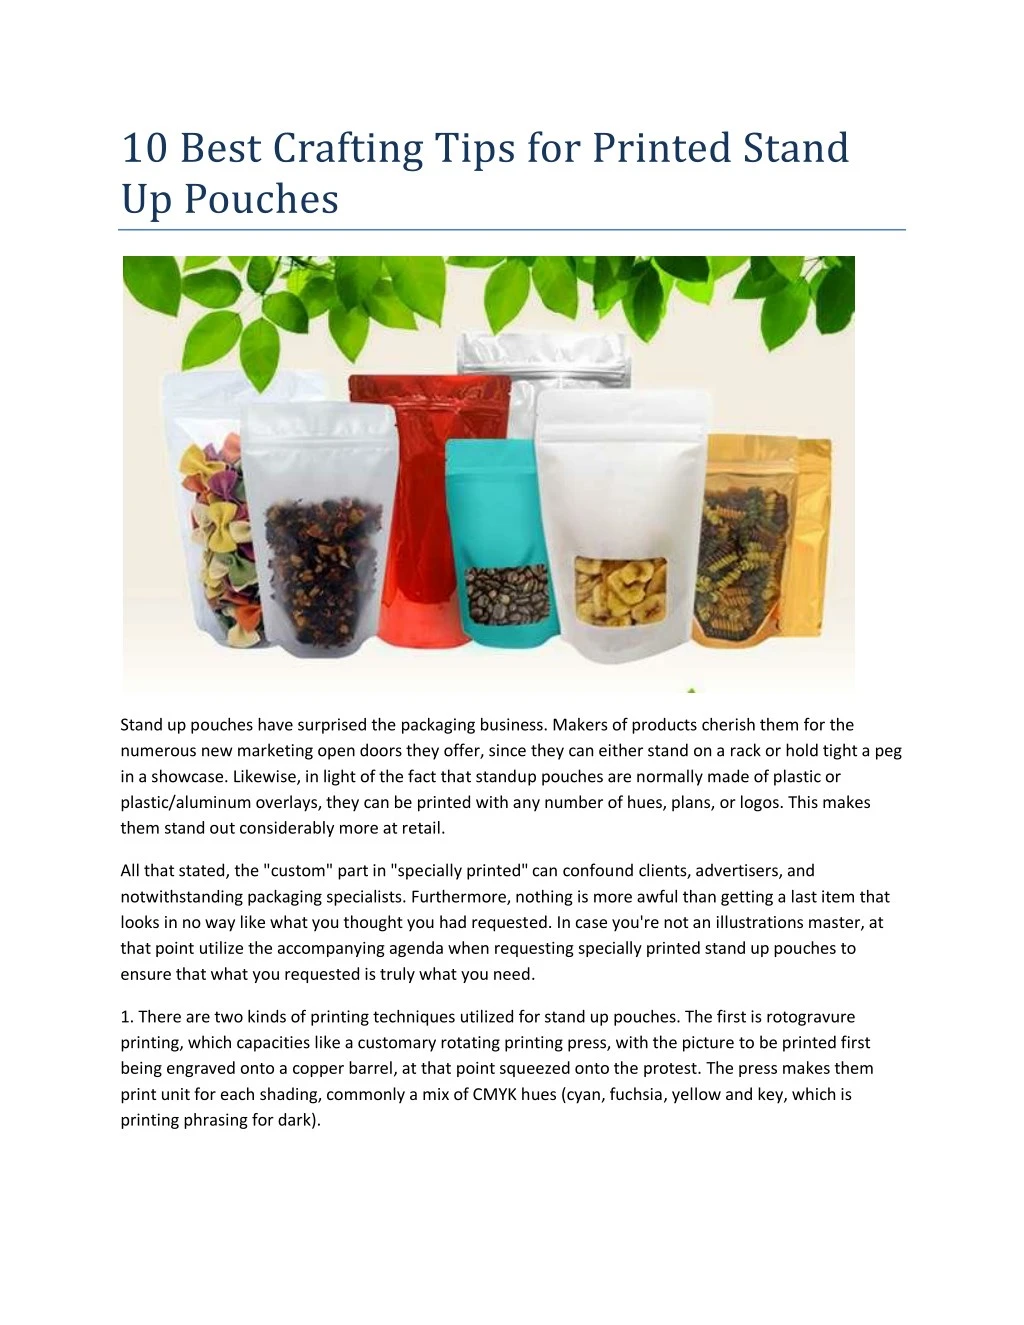 10 best crafting tips for printed stand up pouches